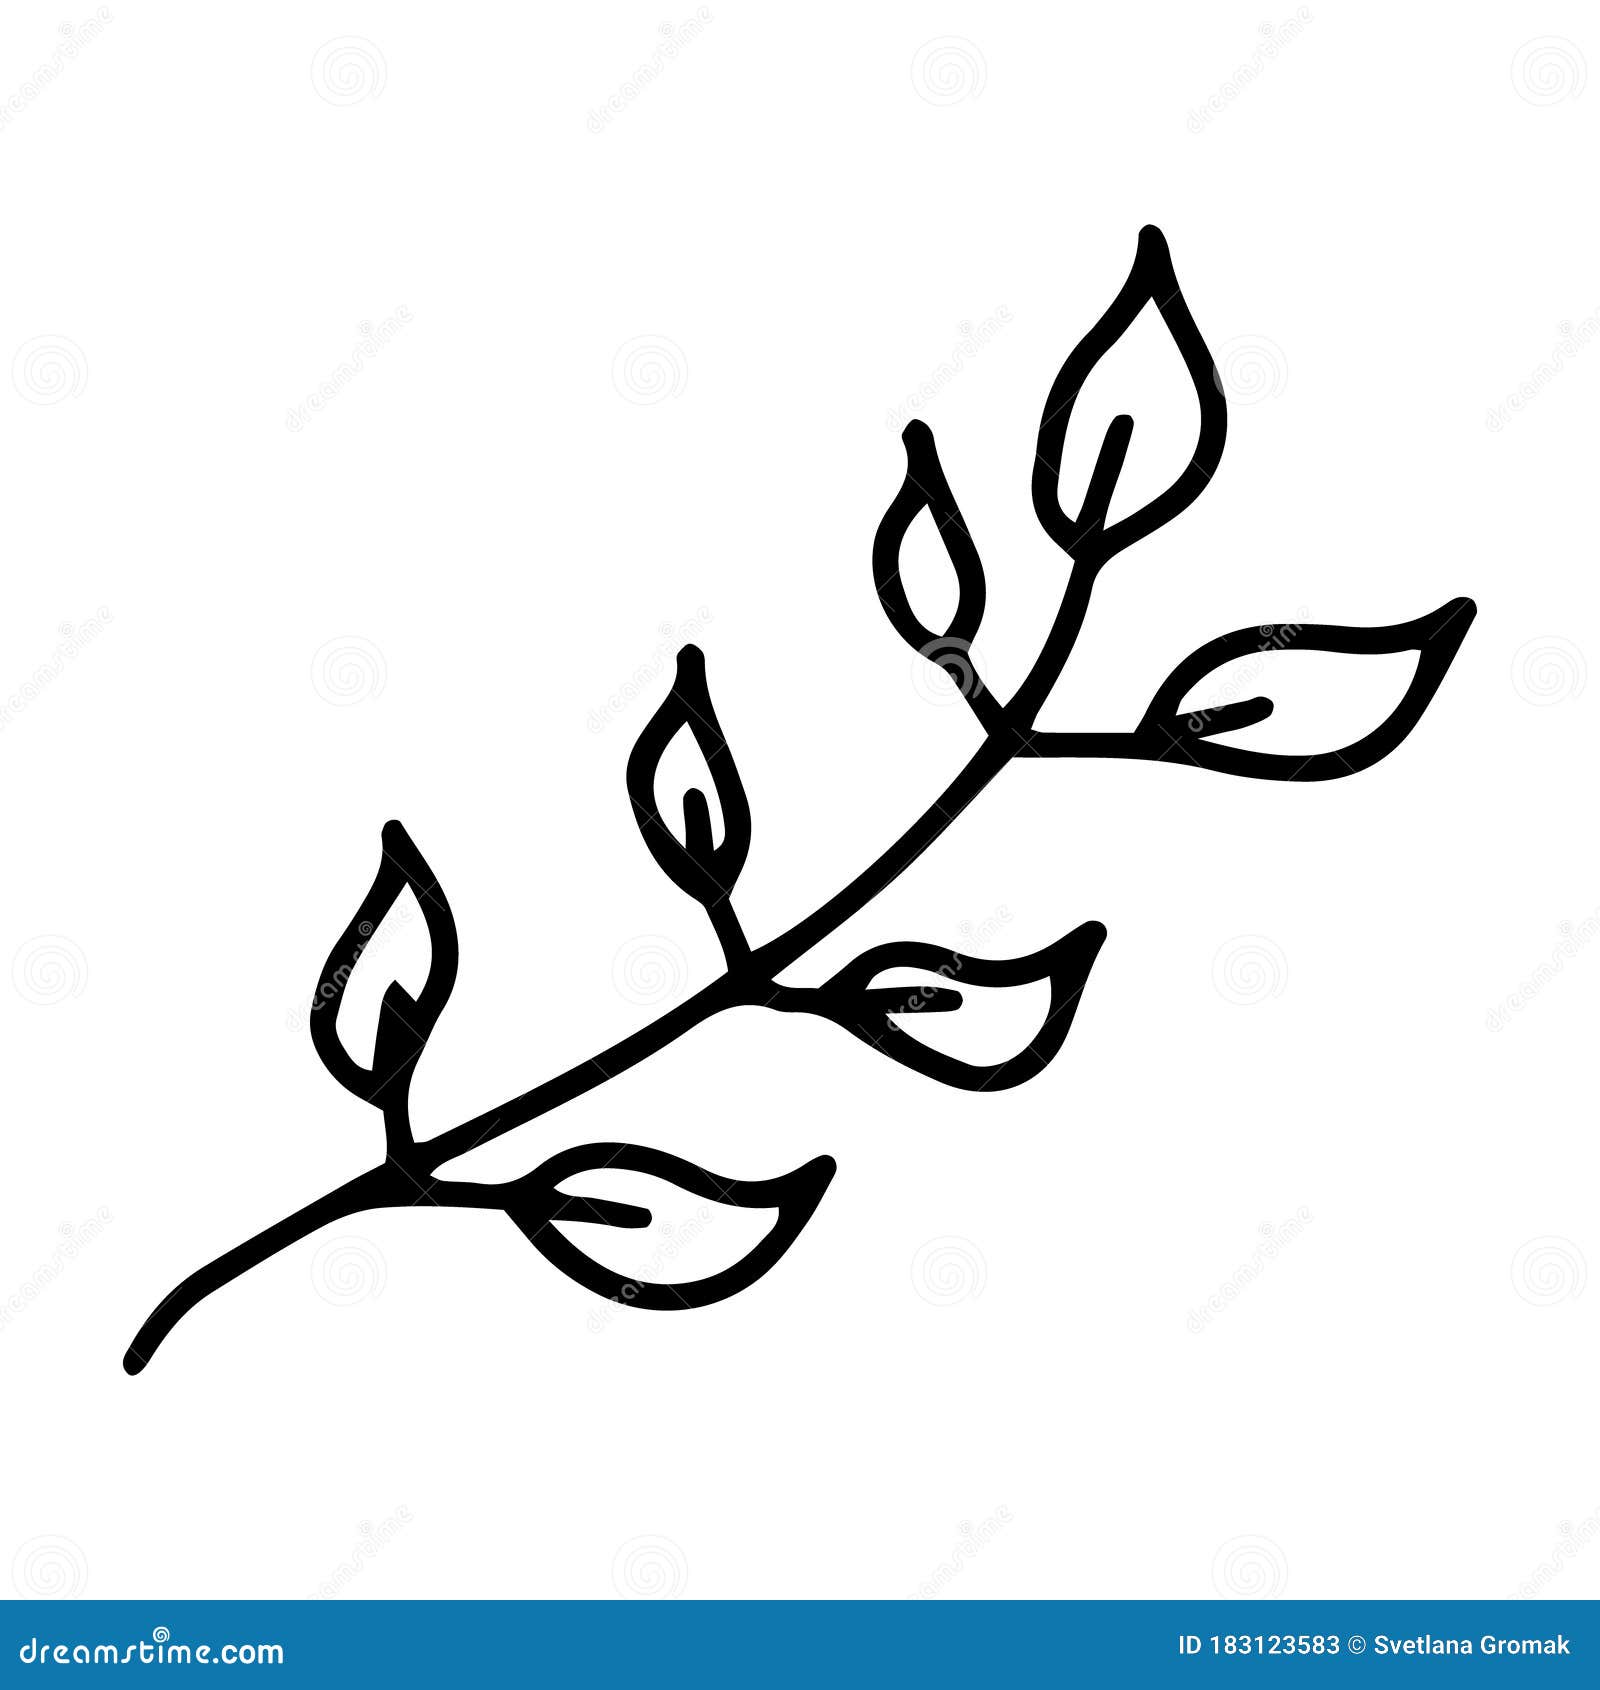 Branch with Leaves Drawn in the Style of Doodle.Outline Drawing by Hand ...